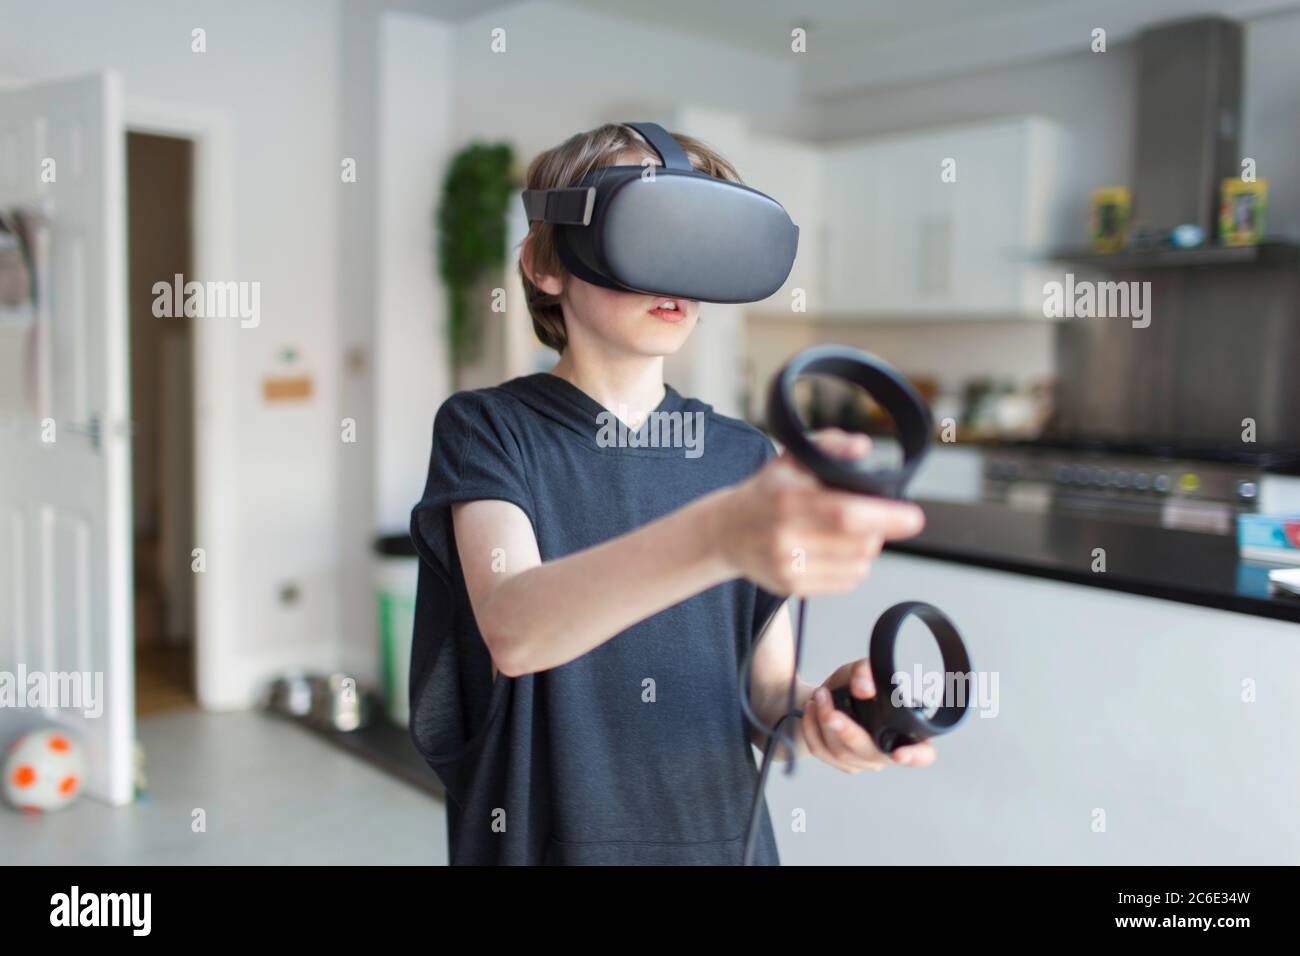 Boy with VRS goggles playing video game Stock Photo